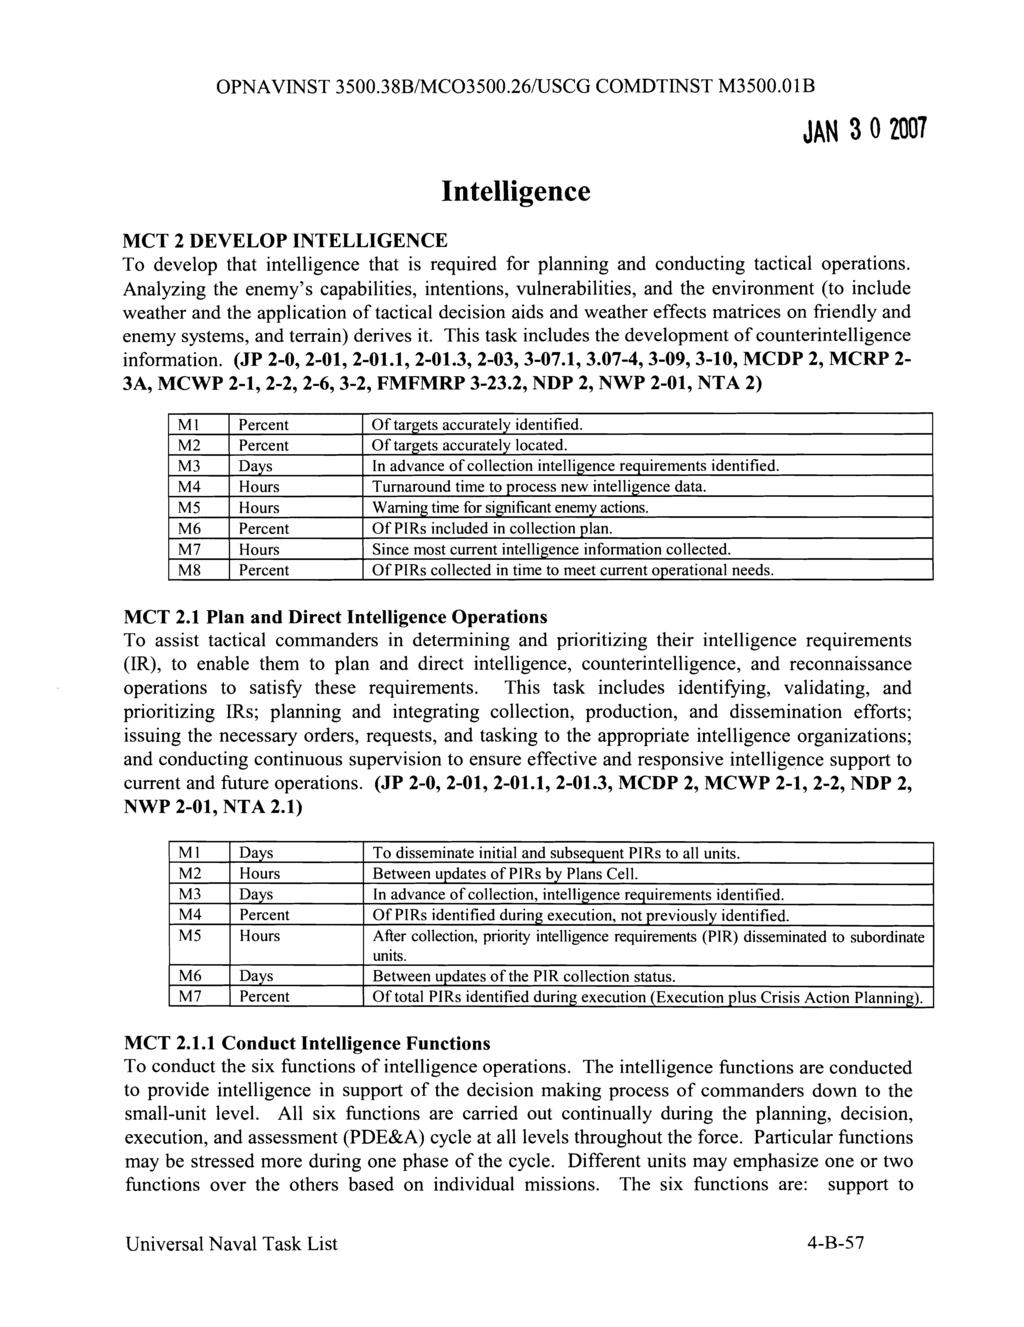 OPNAVINST 3500.38B/MC03500.26/USCG COMDTINST 500.01B Intelligence JAN 3 0 2007 MCT 2 DEVELOP INTELLIGENCE To develop that intelligence that is required for planning and conducting tactical operations.